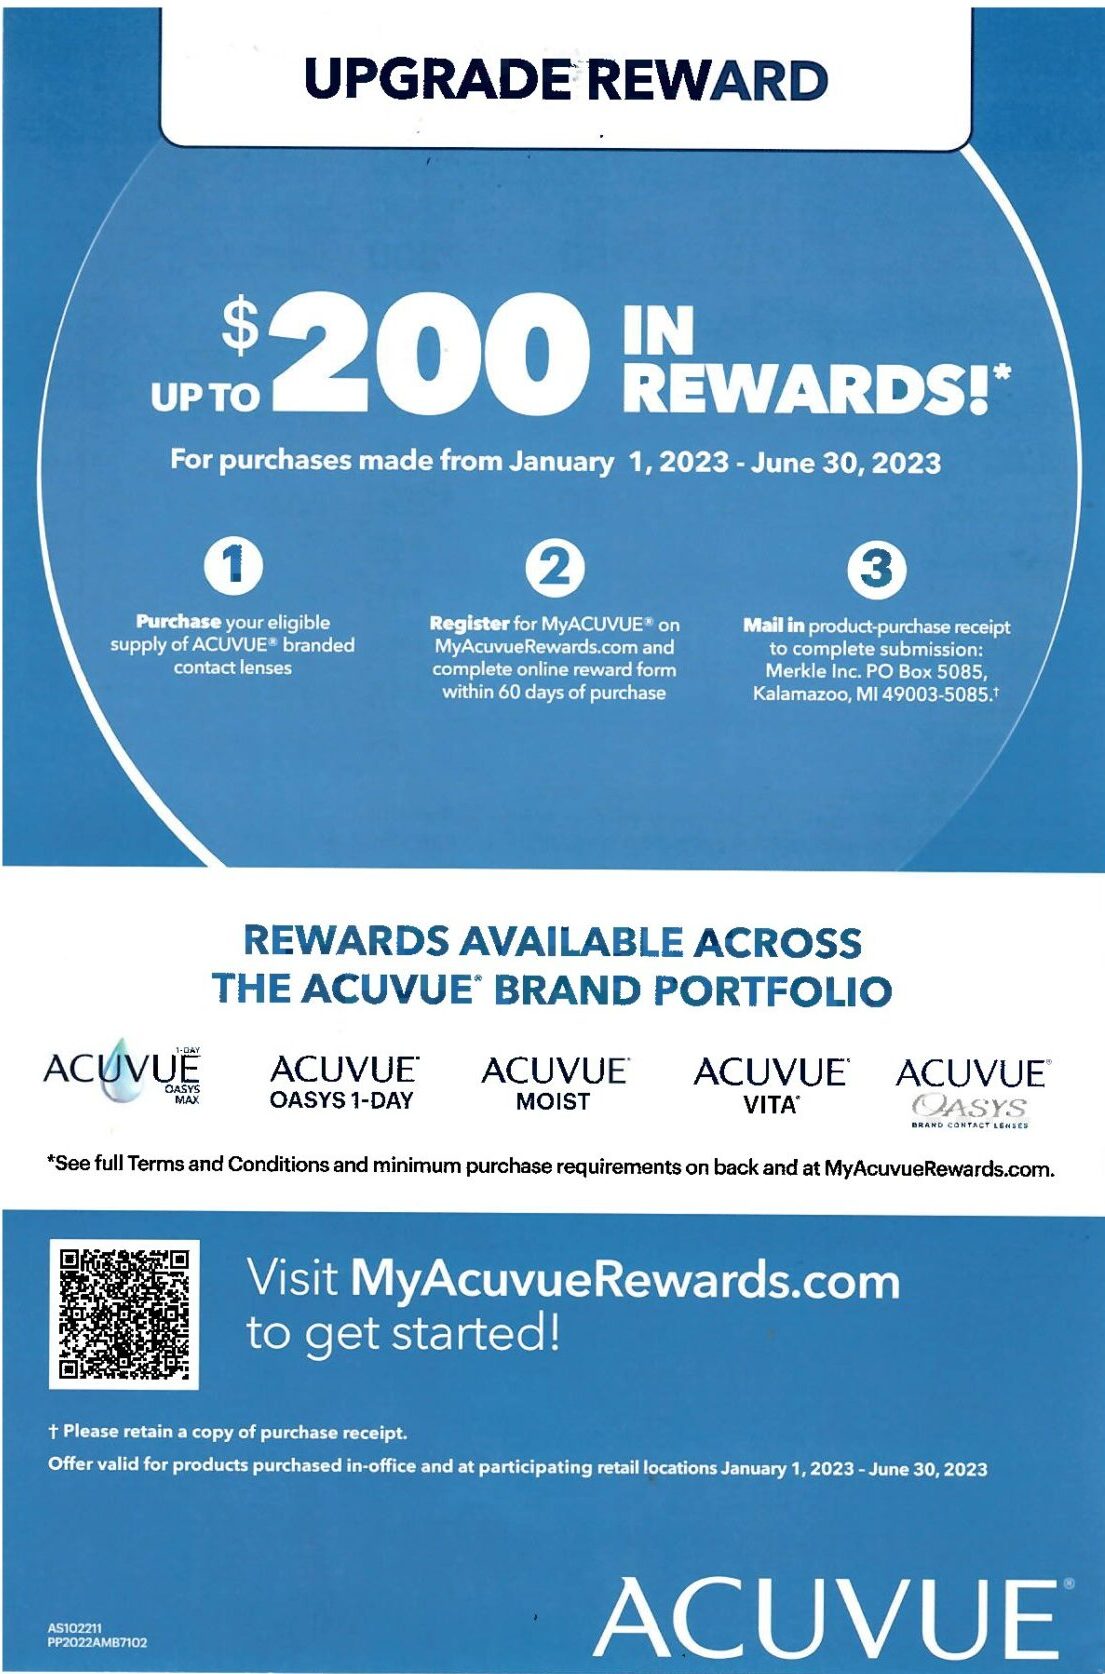 Acuvue new rebate front